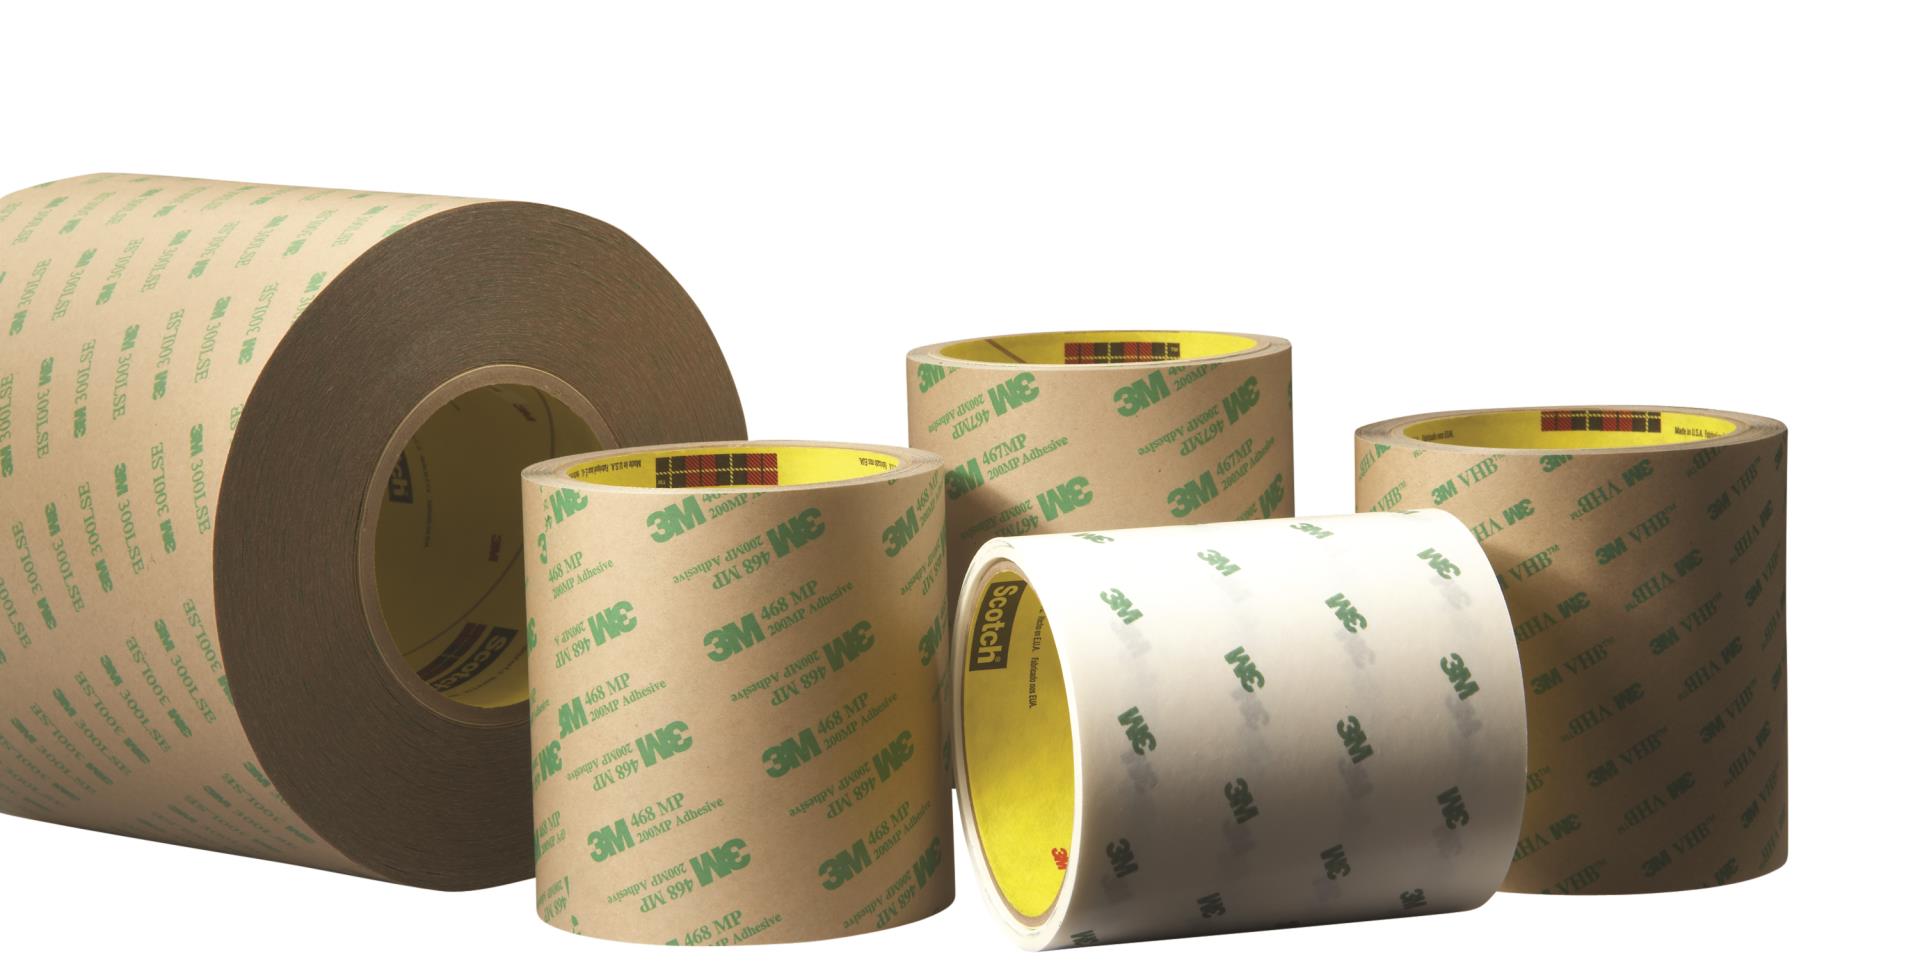 2 PACK 3M 1026 3/4" X 6" TWO SIDED SCOTCH TAPE PADS 